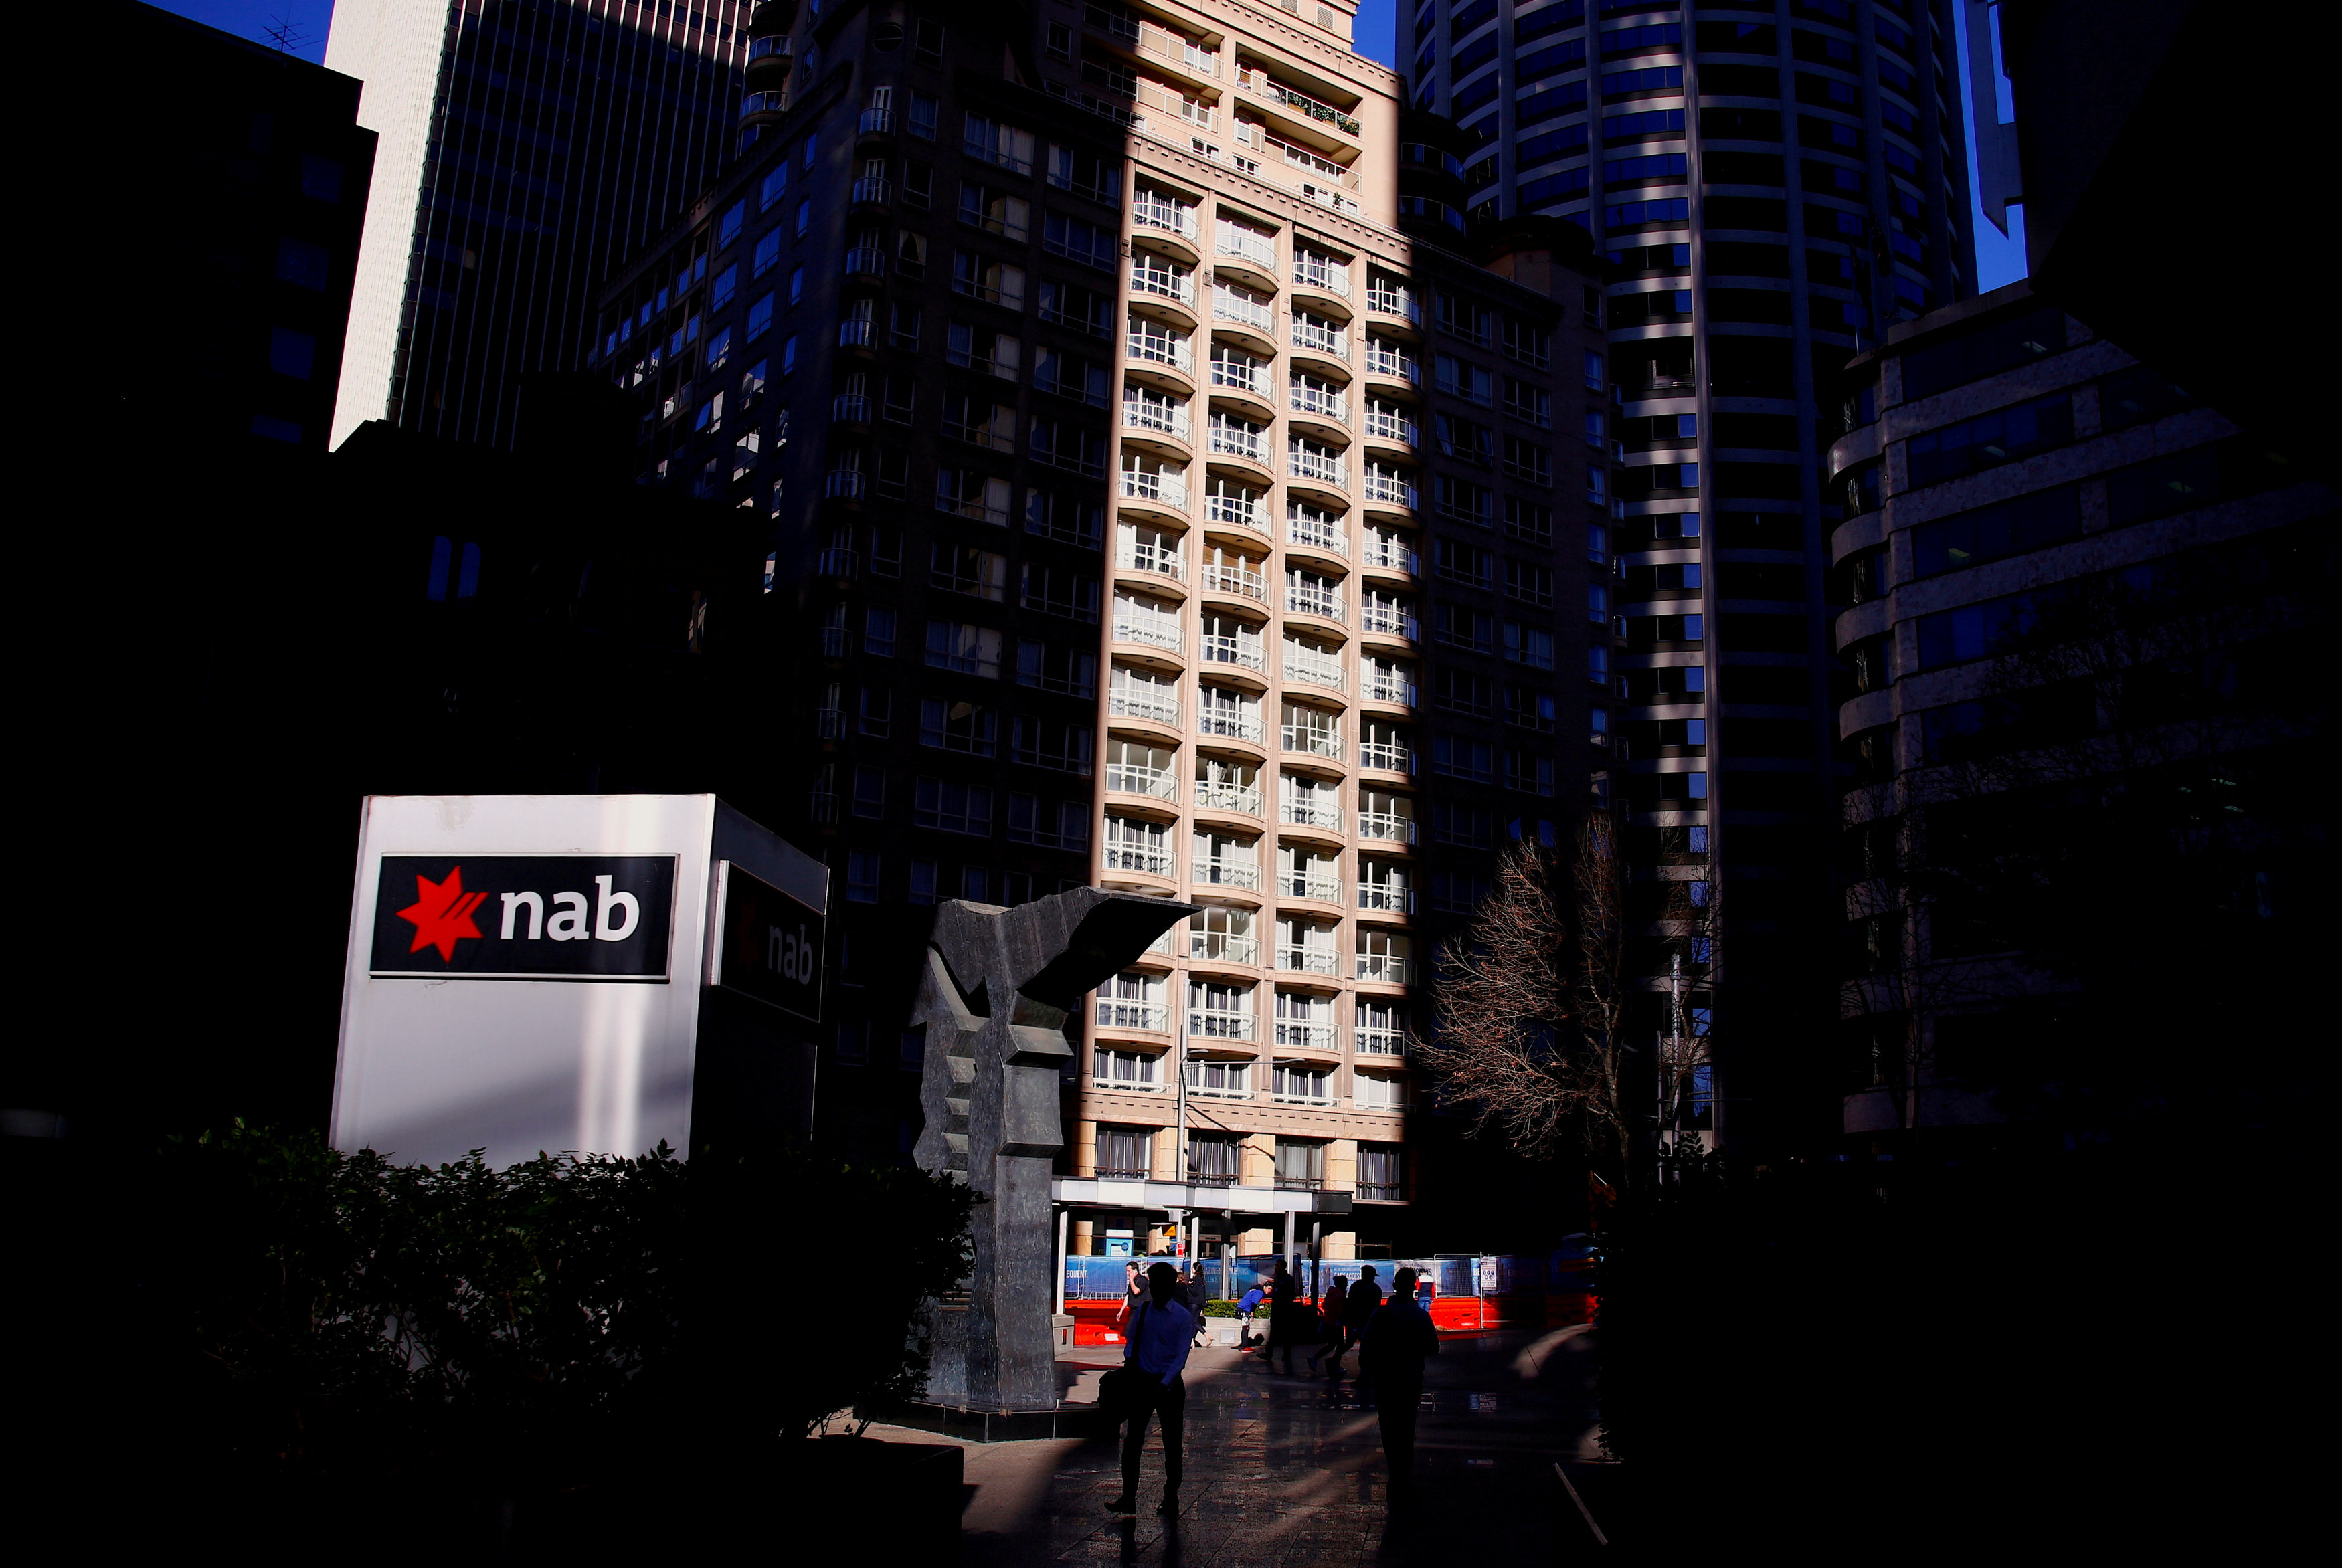 National Australia Bank under fire as banking inquiry opens